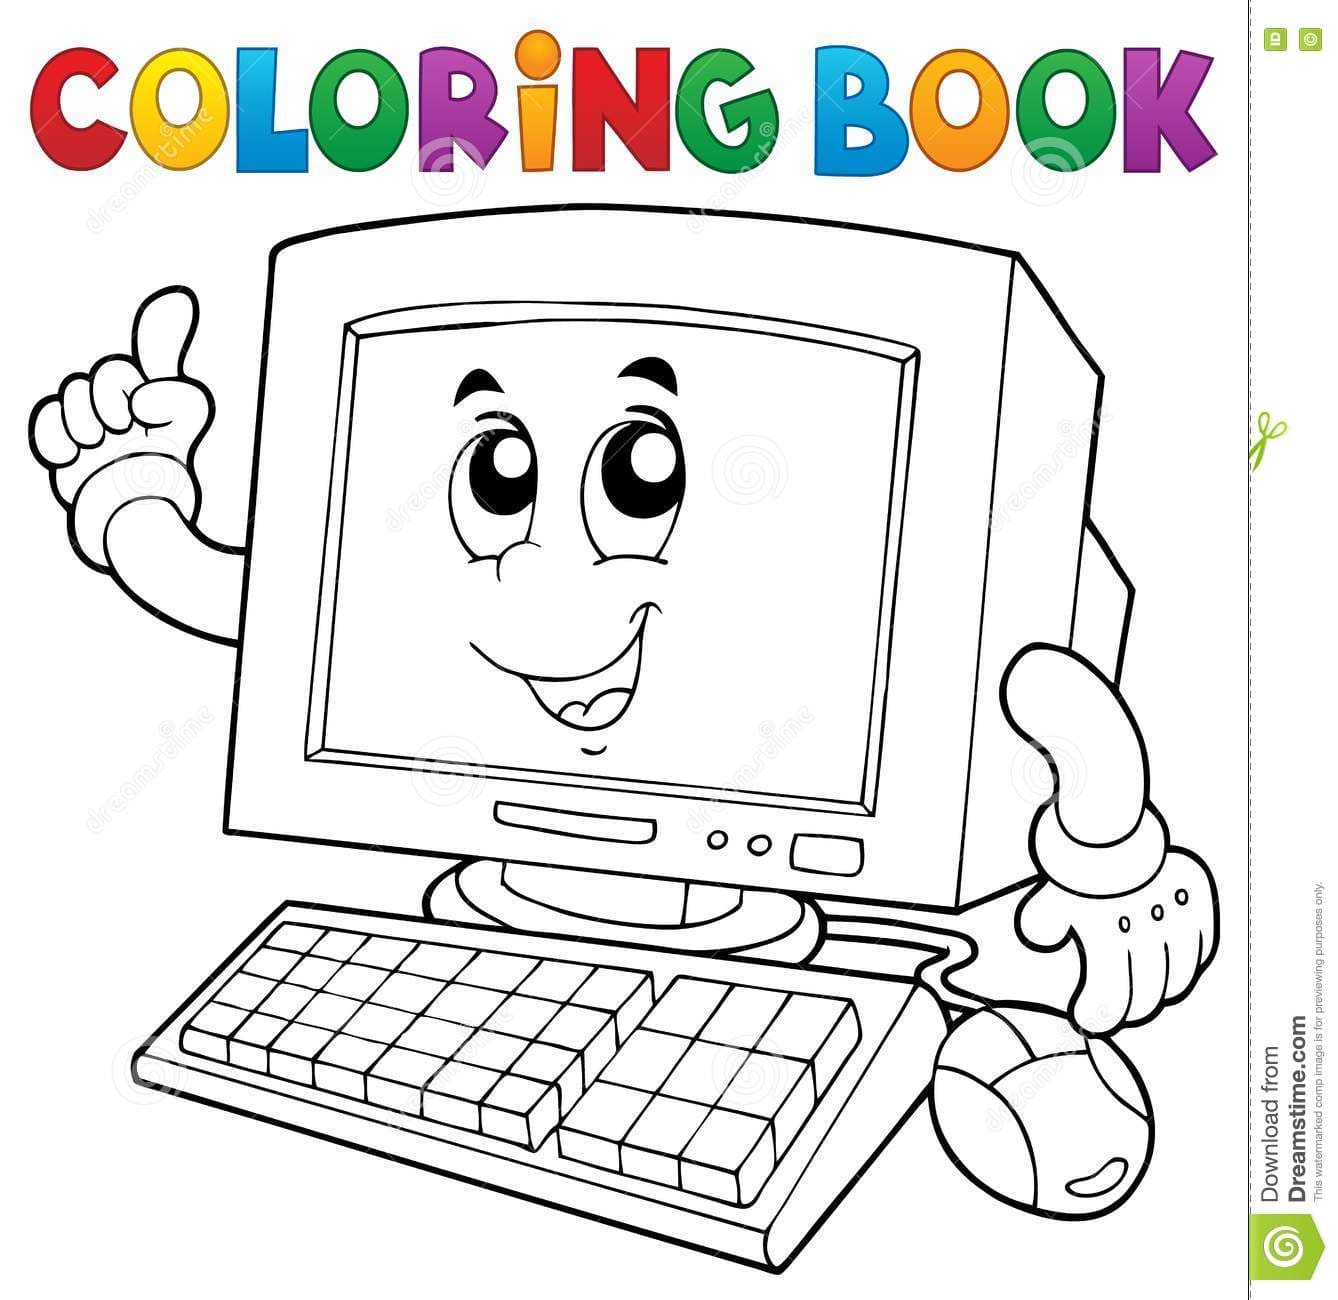 Coloring book computer thematics Coloring Page